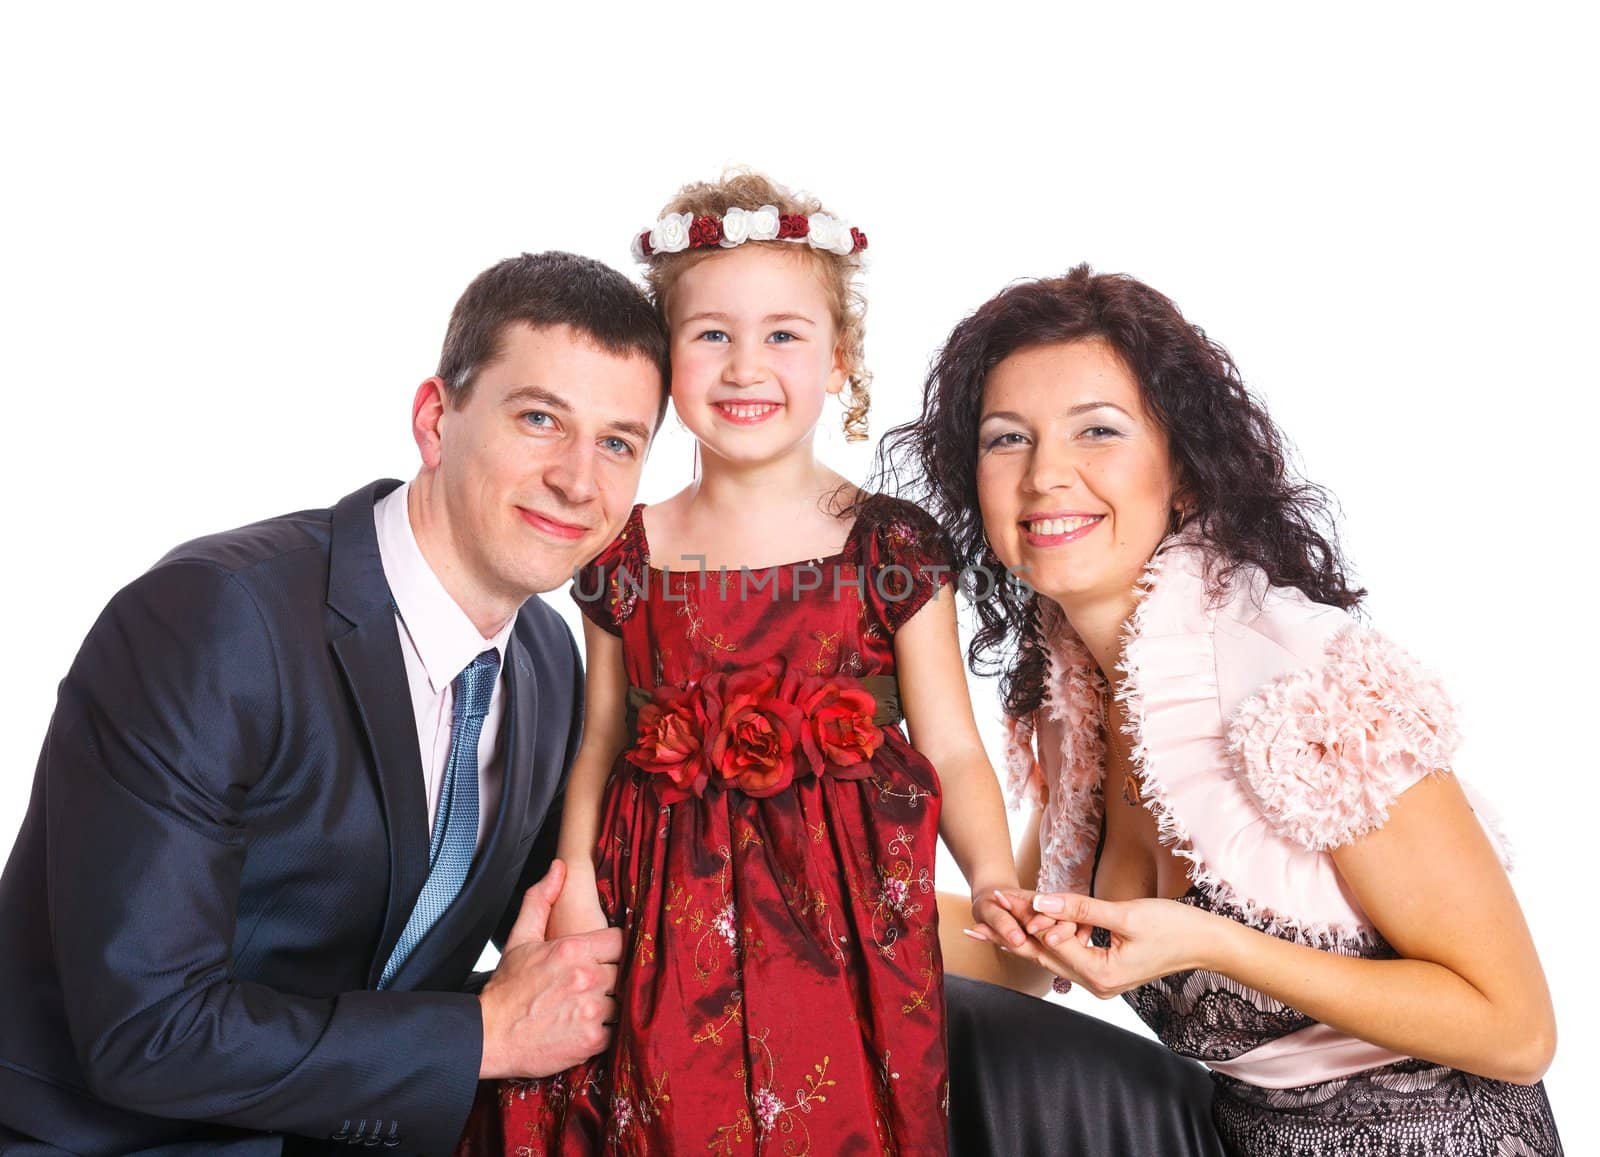 Portrait of happy Caucasian family smiling together on white background